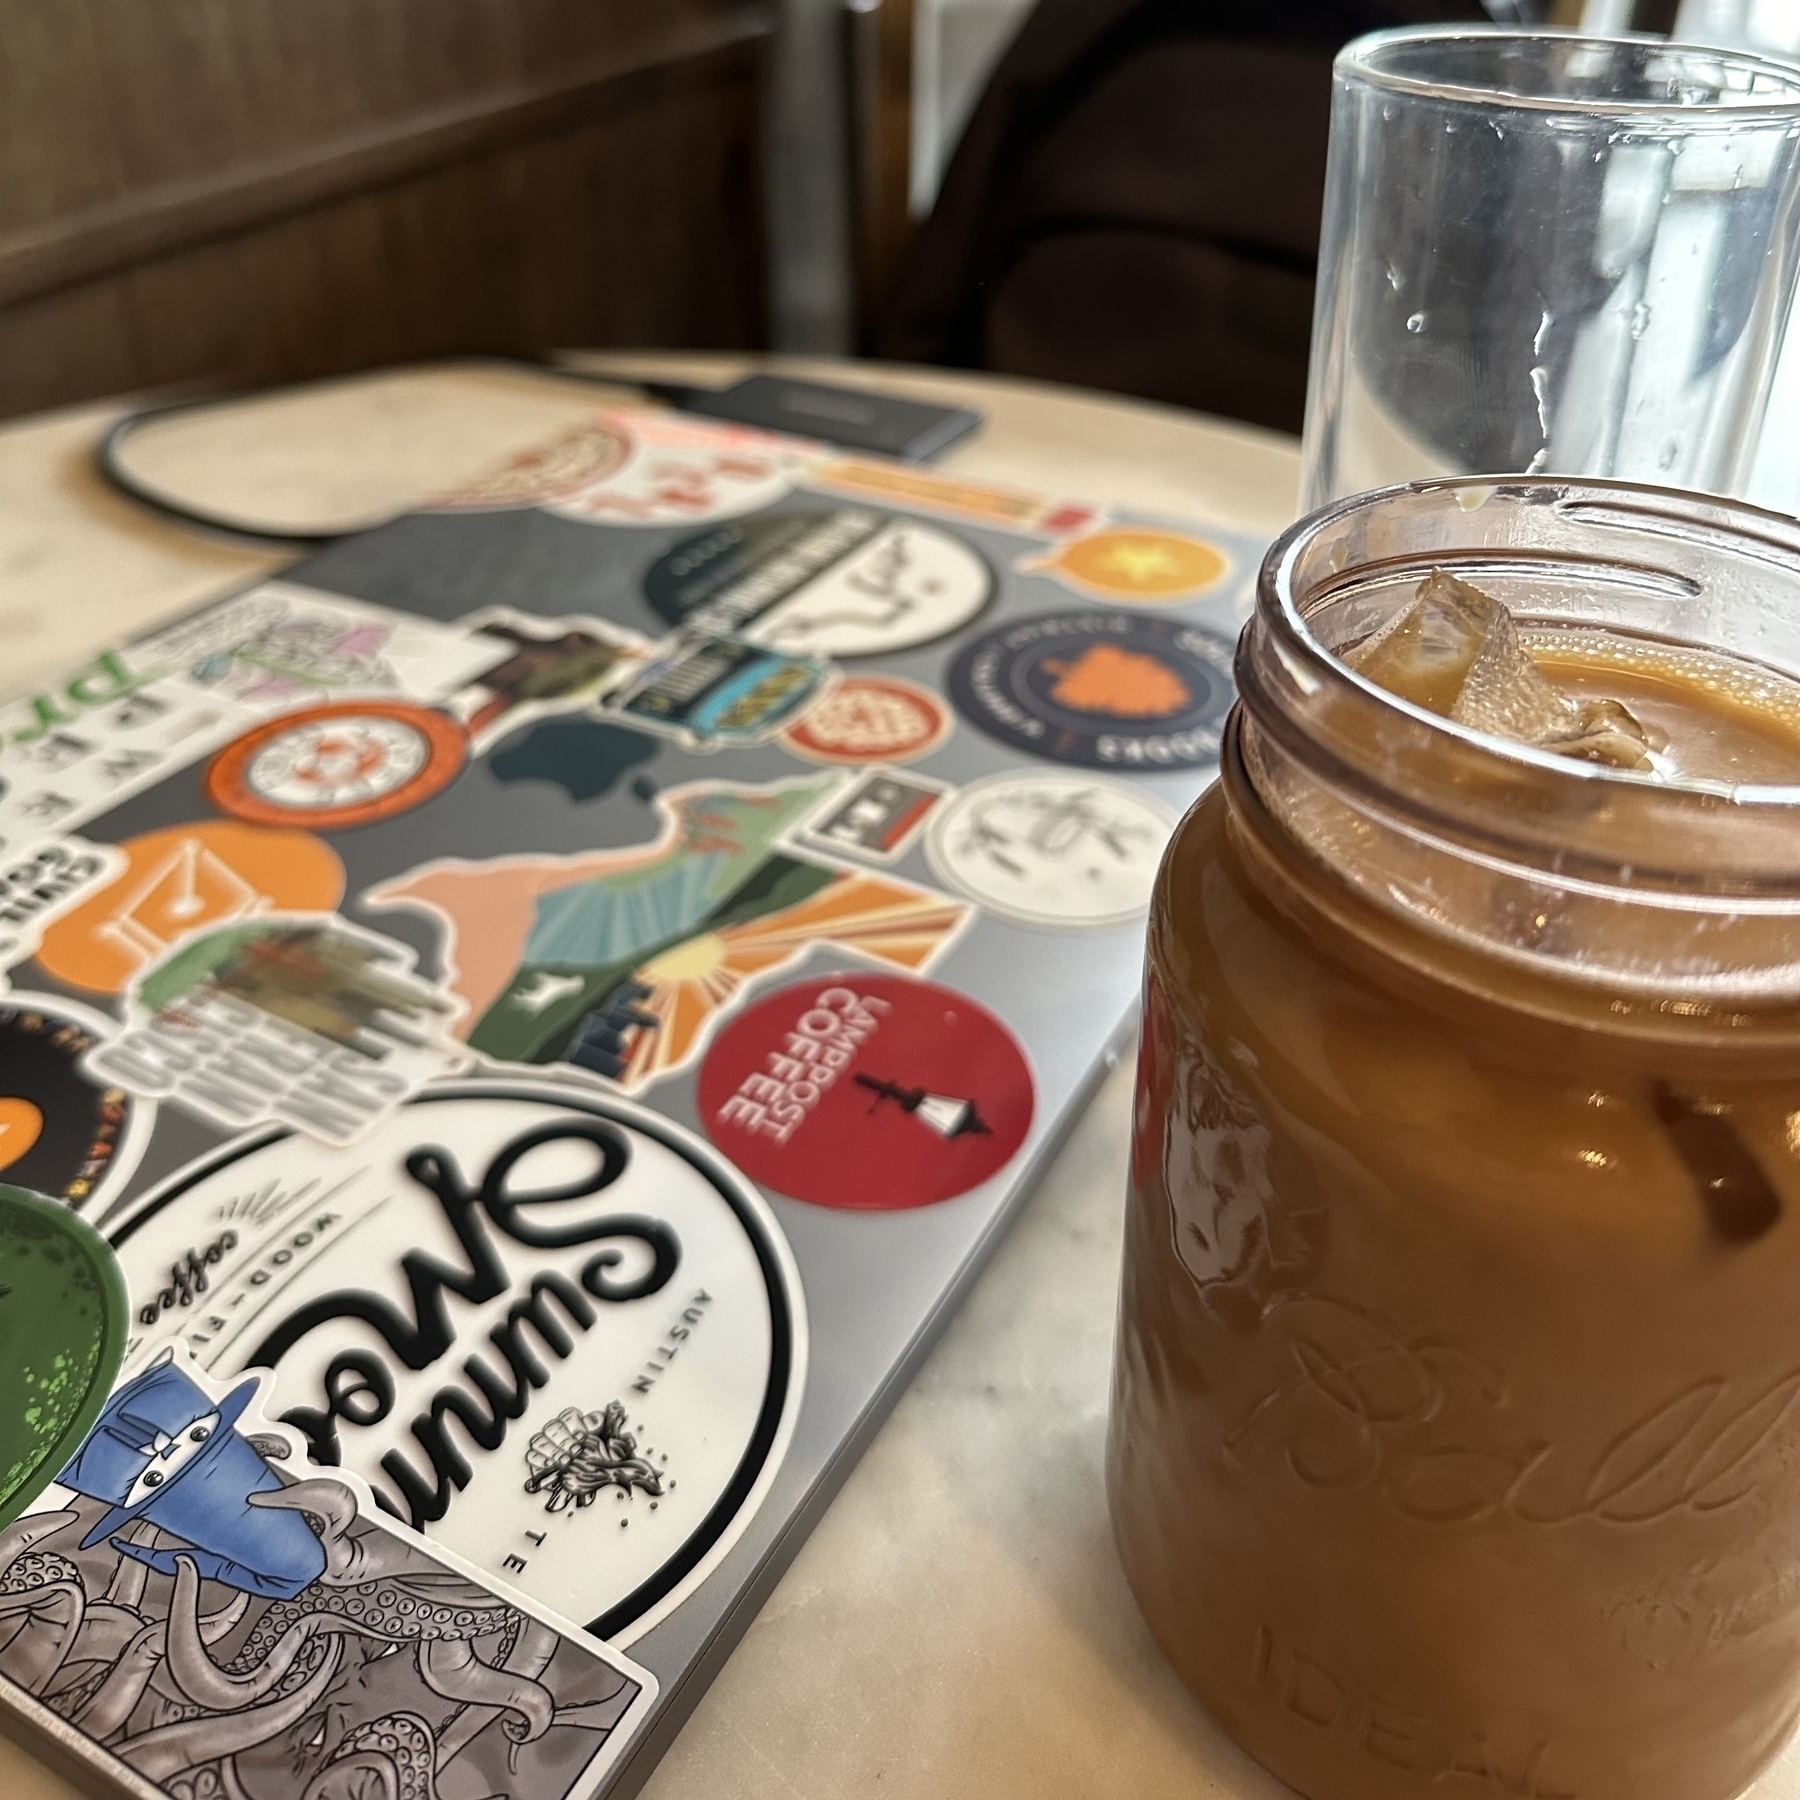 Iced coffee and laptop.